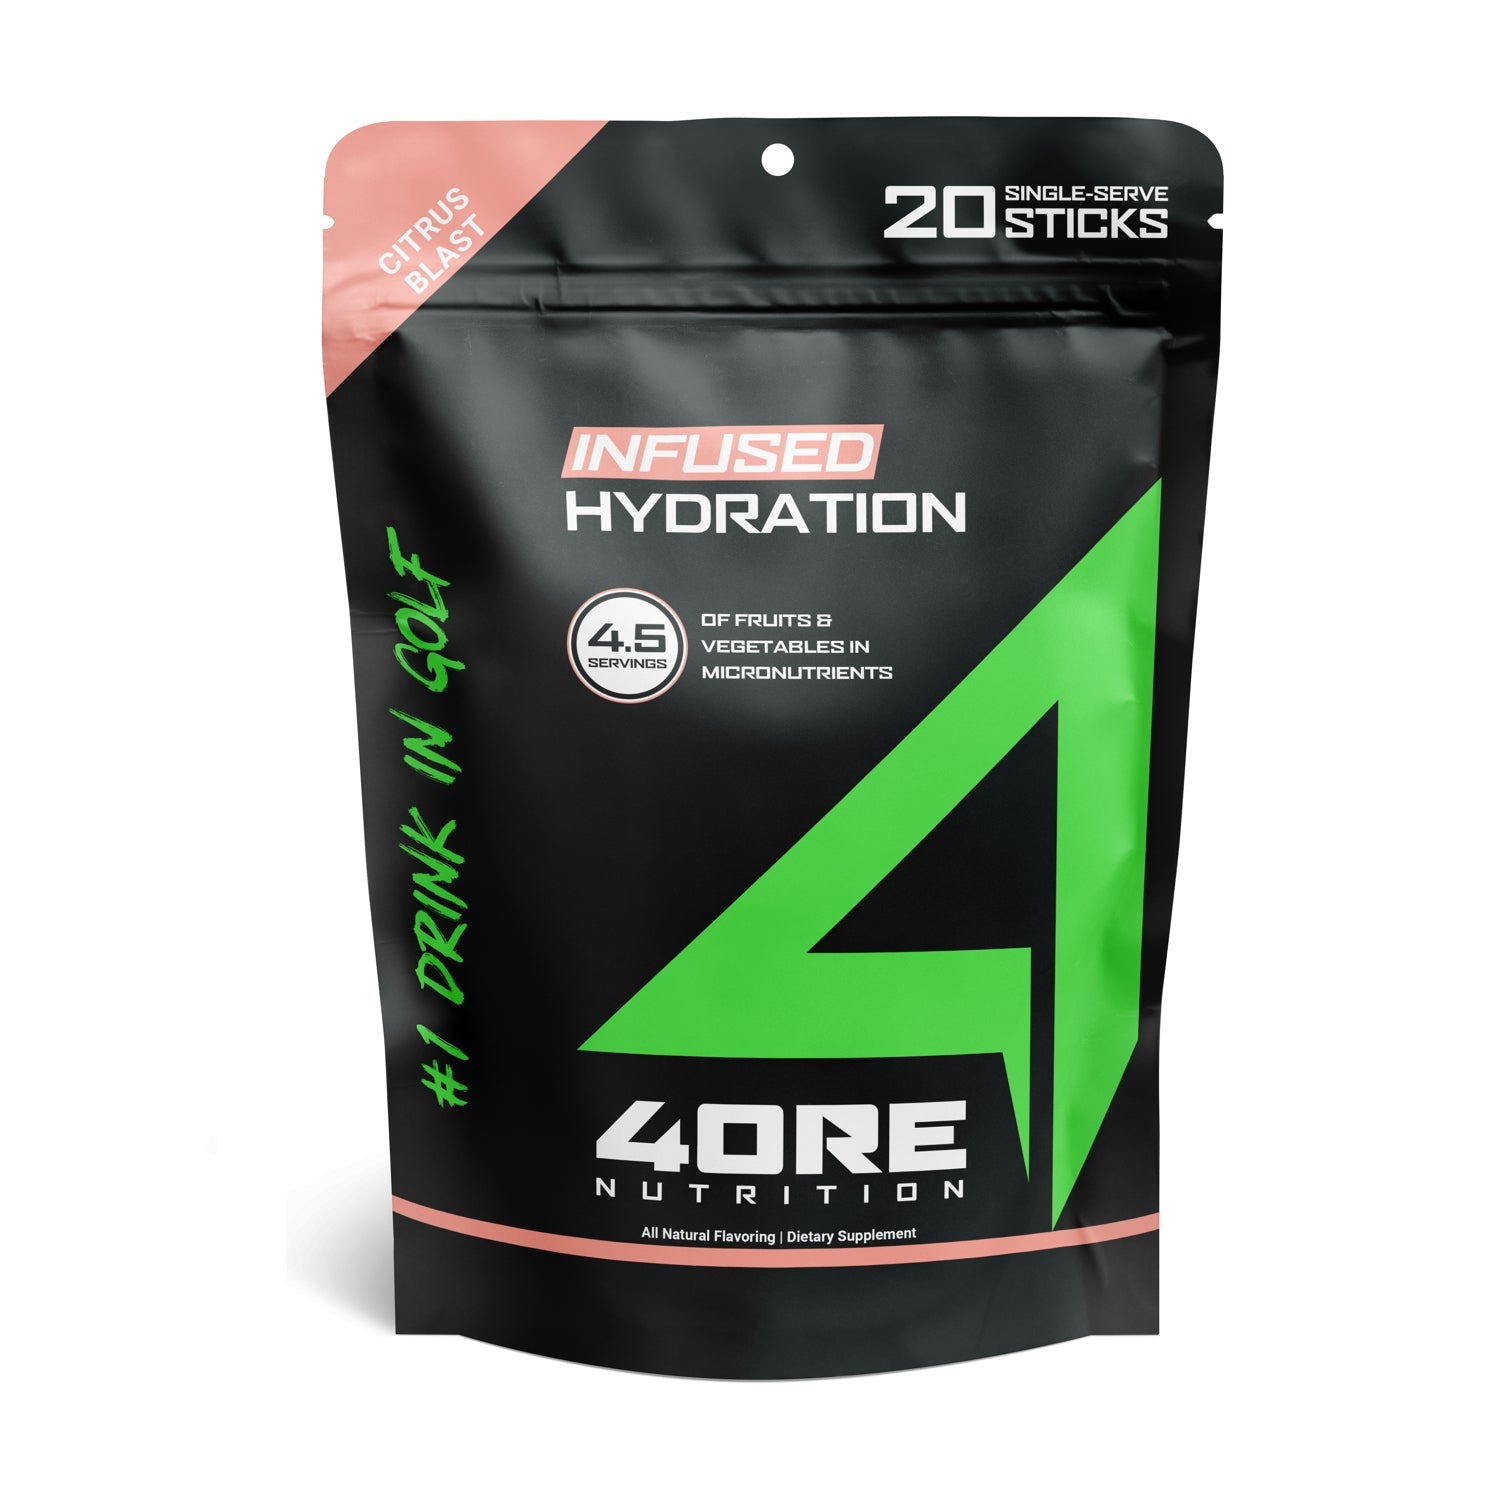 4ORE Infused Hydration